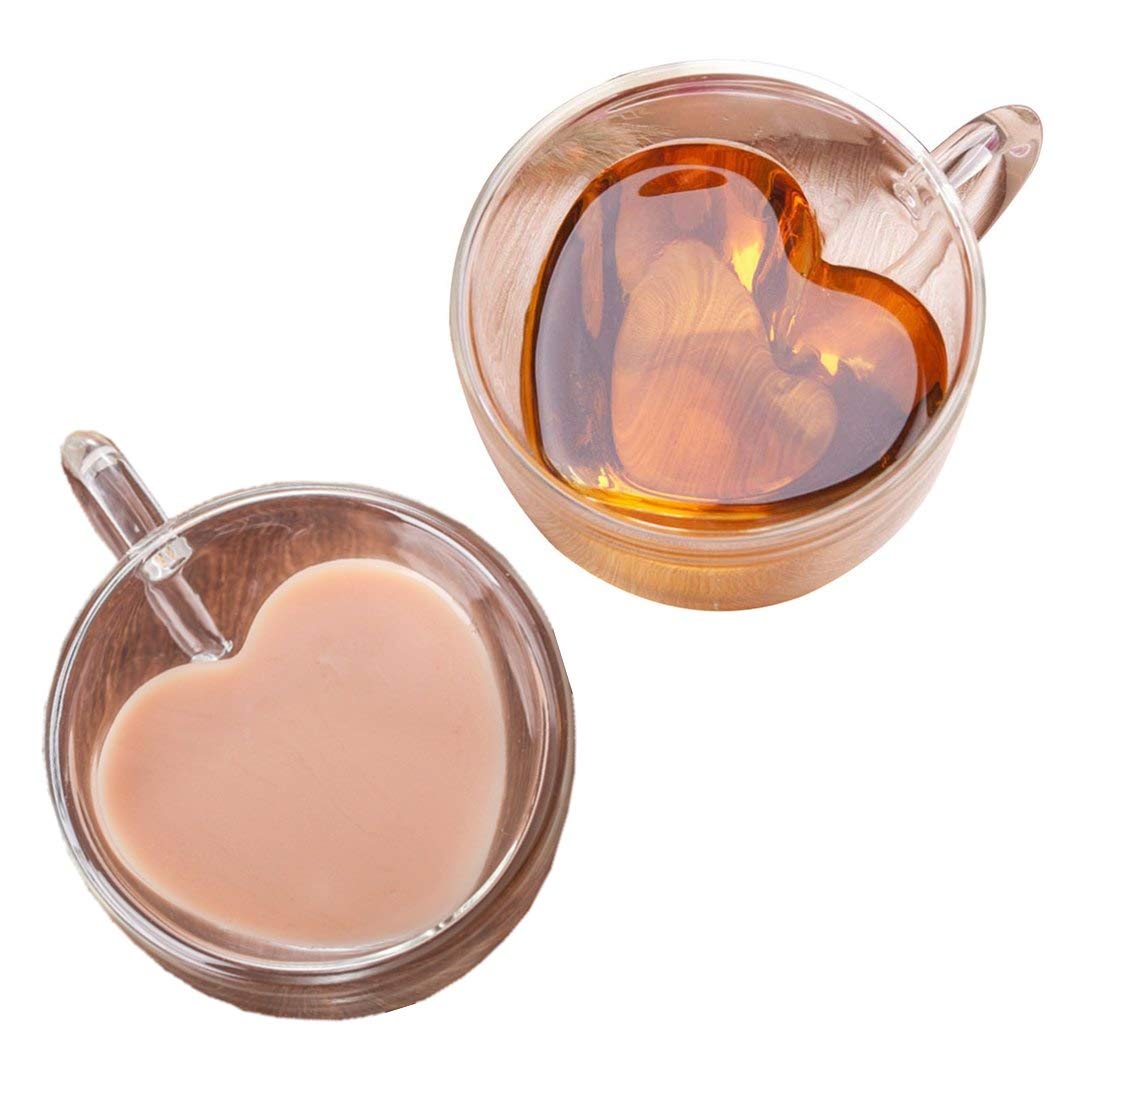 i KiTo Heart Shaped Espresso cups Set Of 2-Double Wall glass coffee cup Insulated Mugs With closed Handle-Heat Resistant glass Espresso